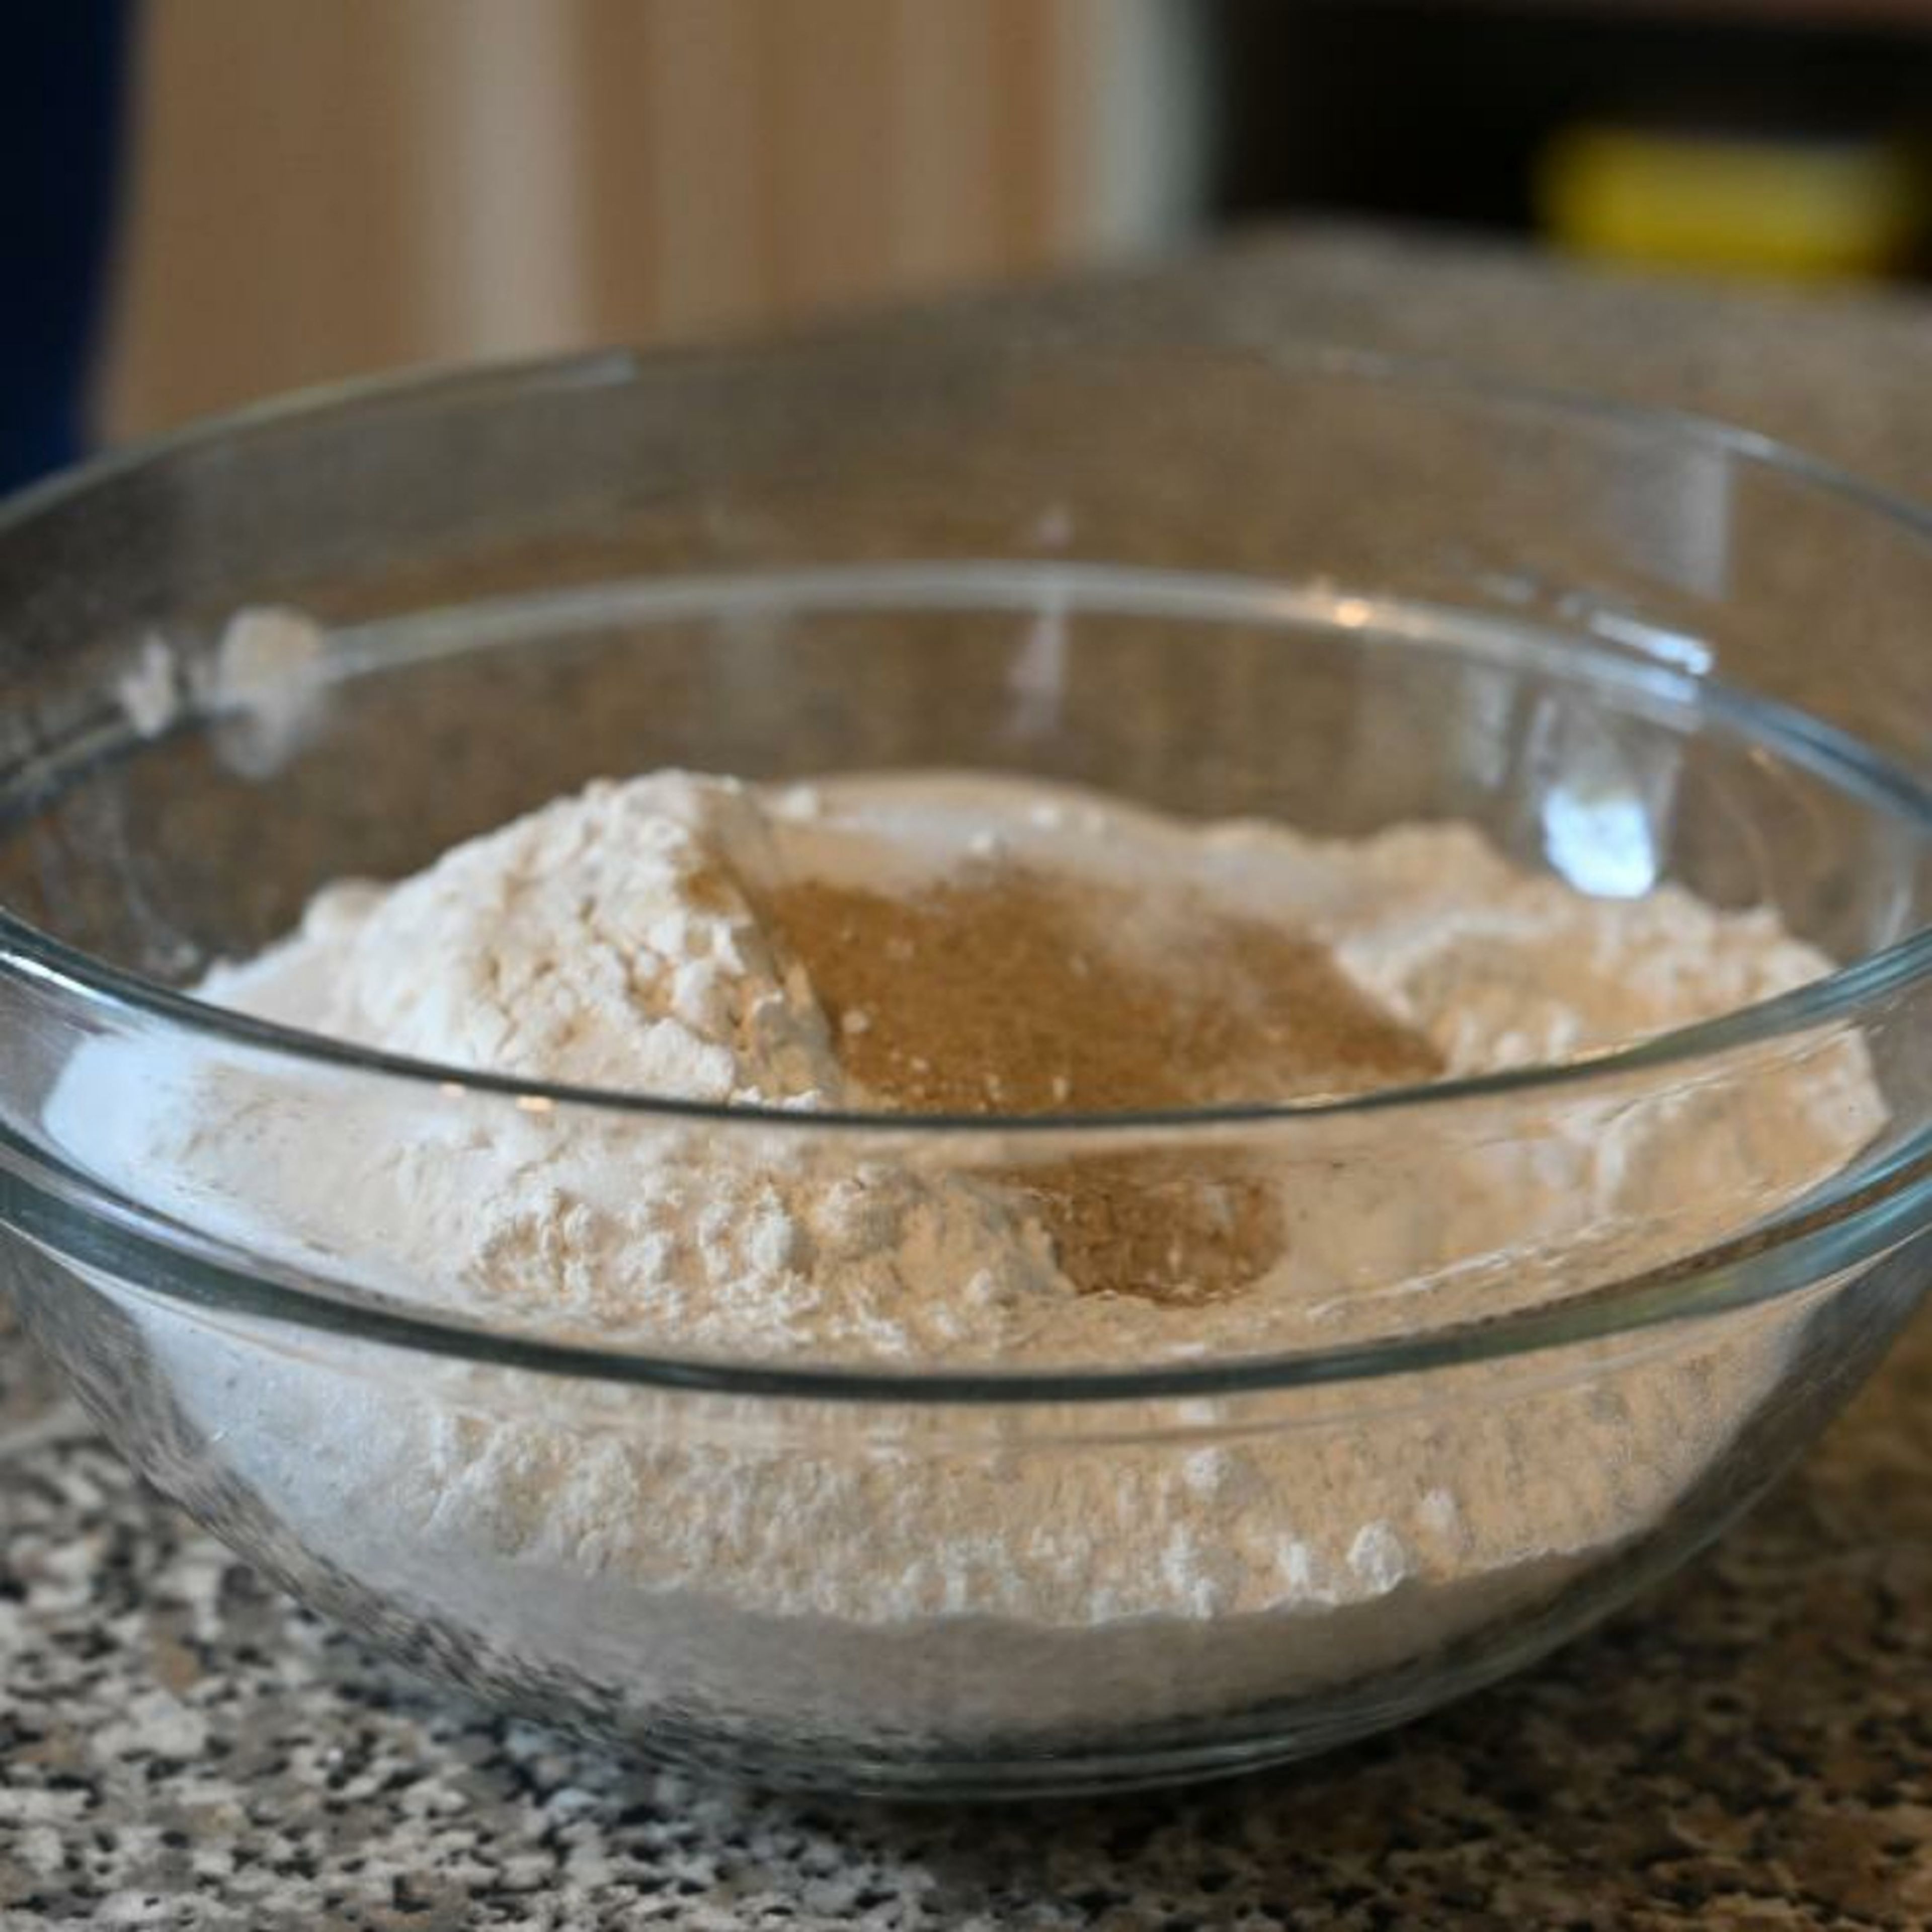 Mix the flour, sugar and salt in a large bowl.